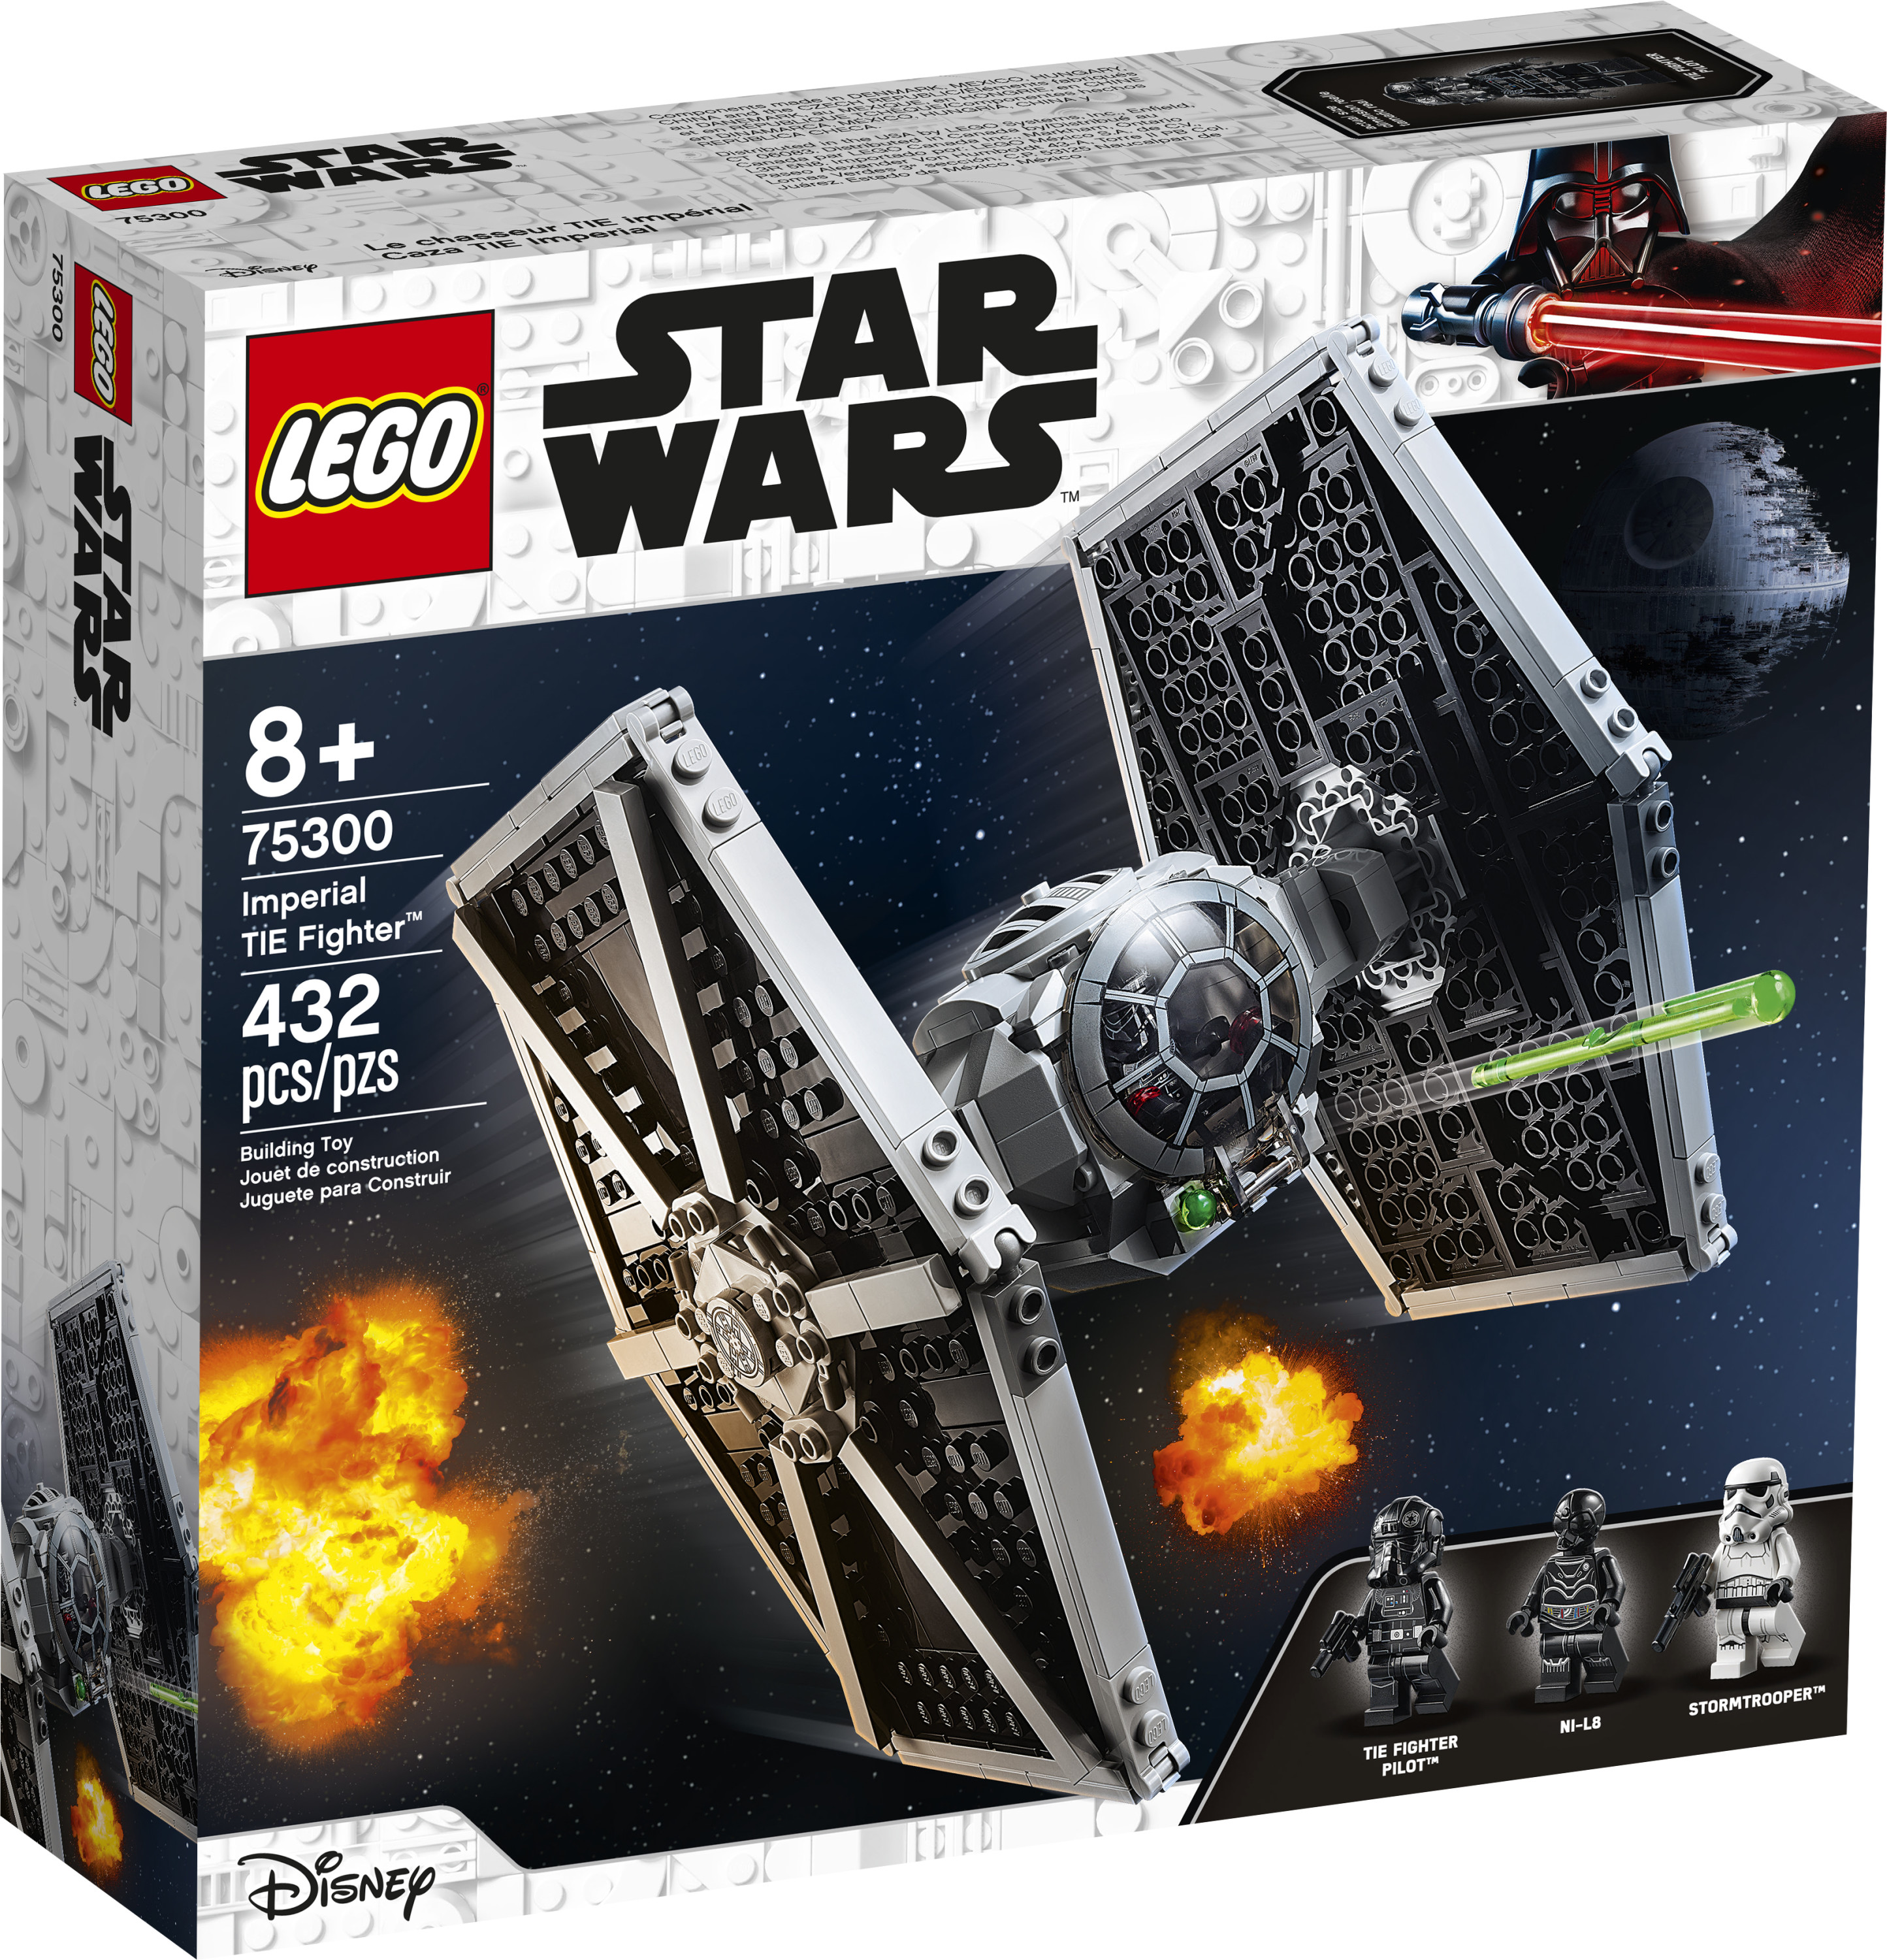 LEGO Star Wars Imperial TIE Fighter 75300, with Stormtrooper and TIE Fighter Pilot Minifigure - image 4 of 8